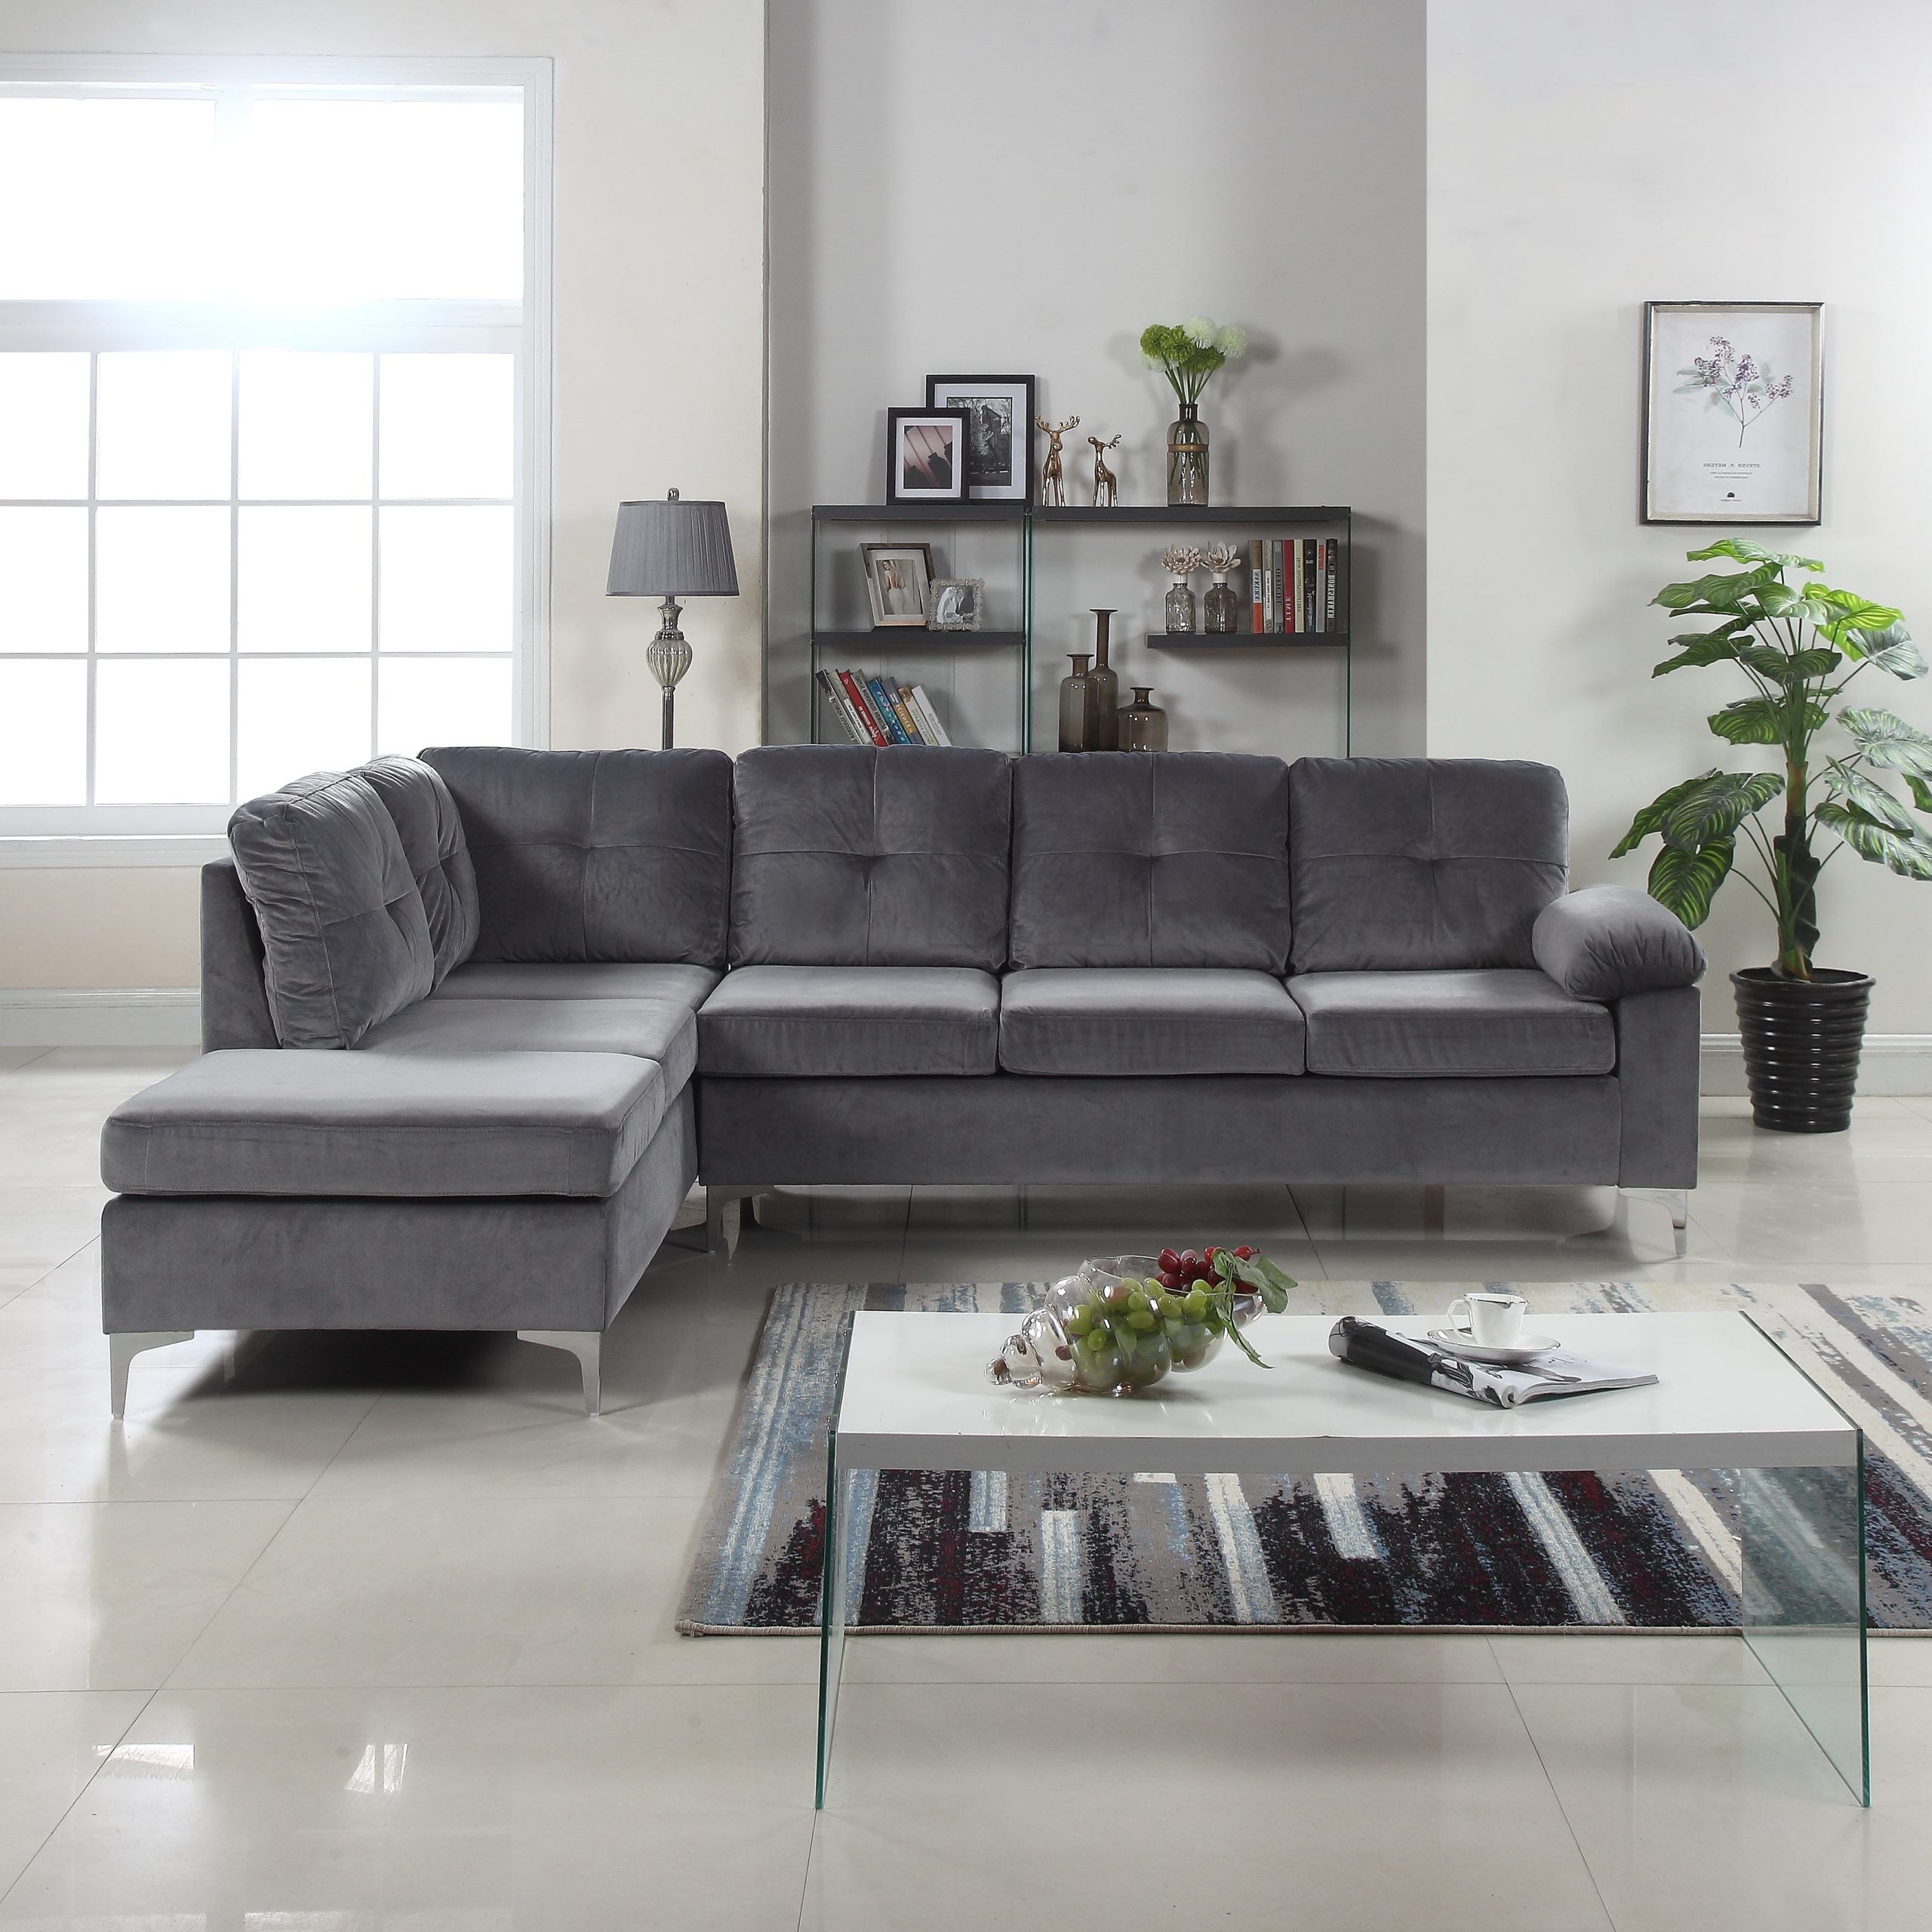 Dark Grey Polyester Sofa Couches Throughout 2018 Tufted Brush Microfiber Sectional Sofa, Large L Shape Couch, Dark Grey (View 11 of 15)